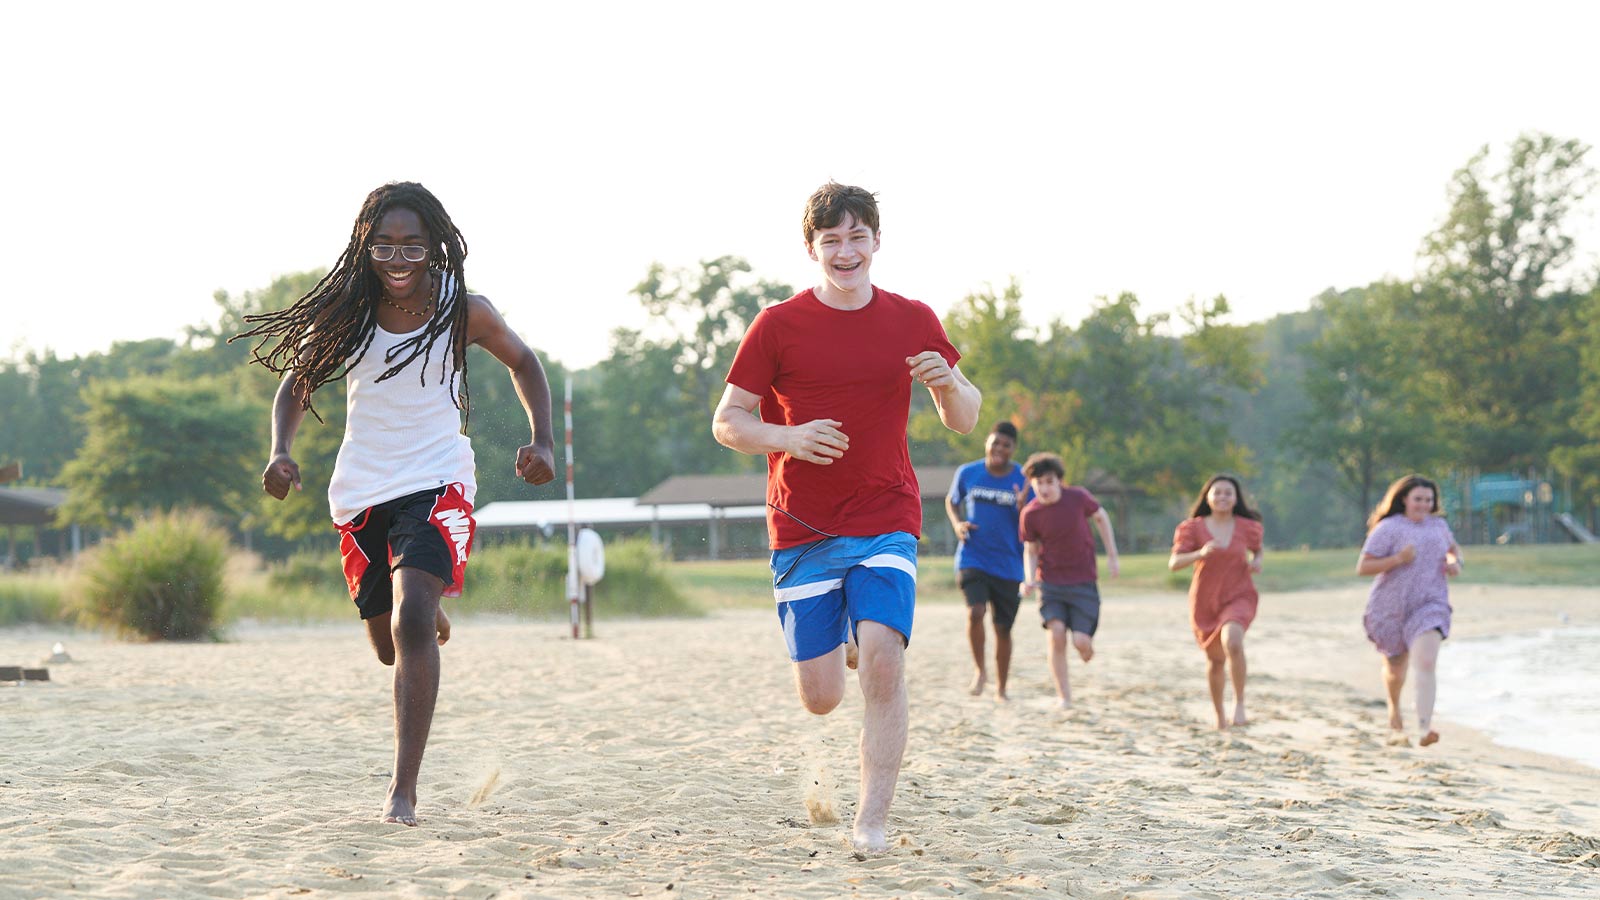 A group of young people joyfully running on a sandy beach.